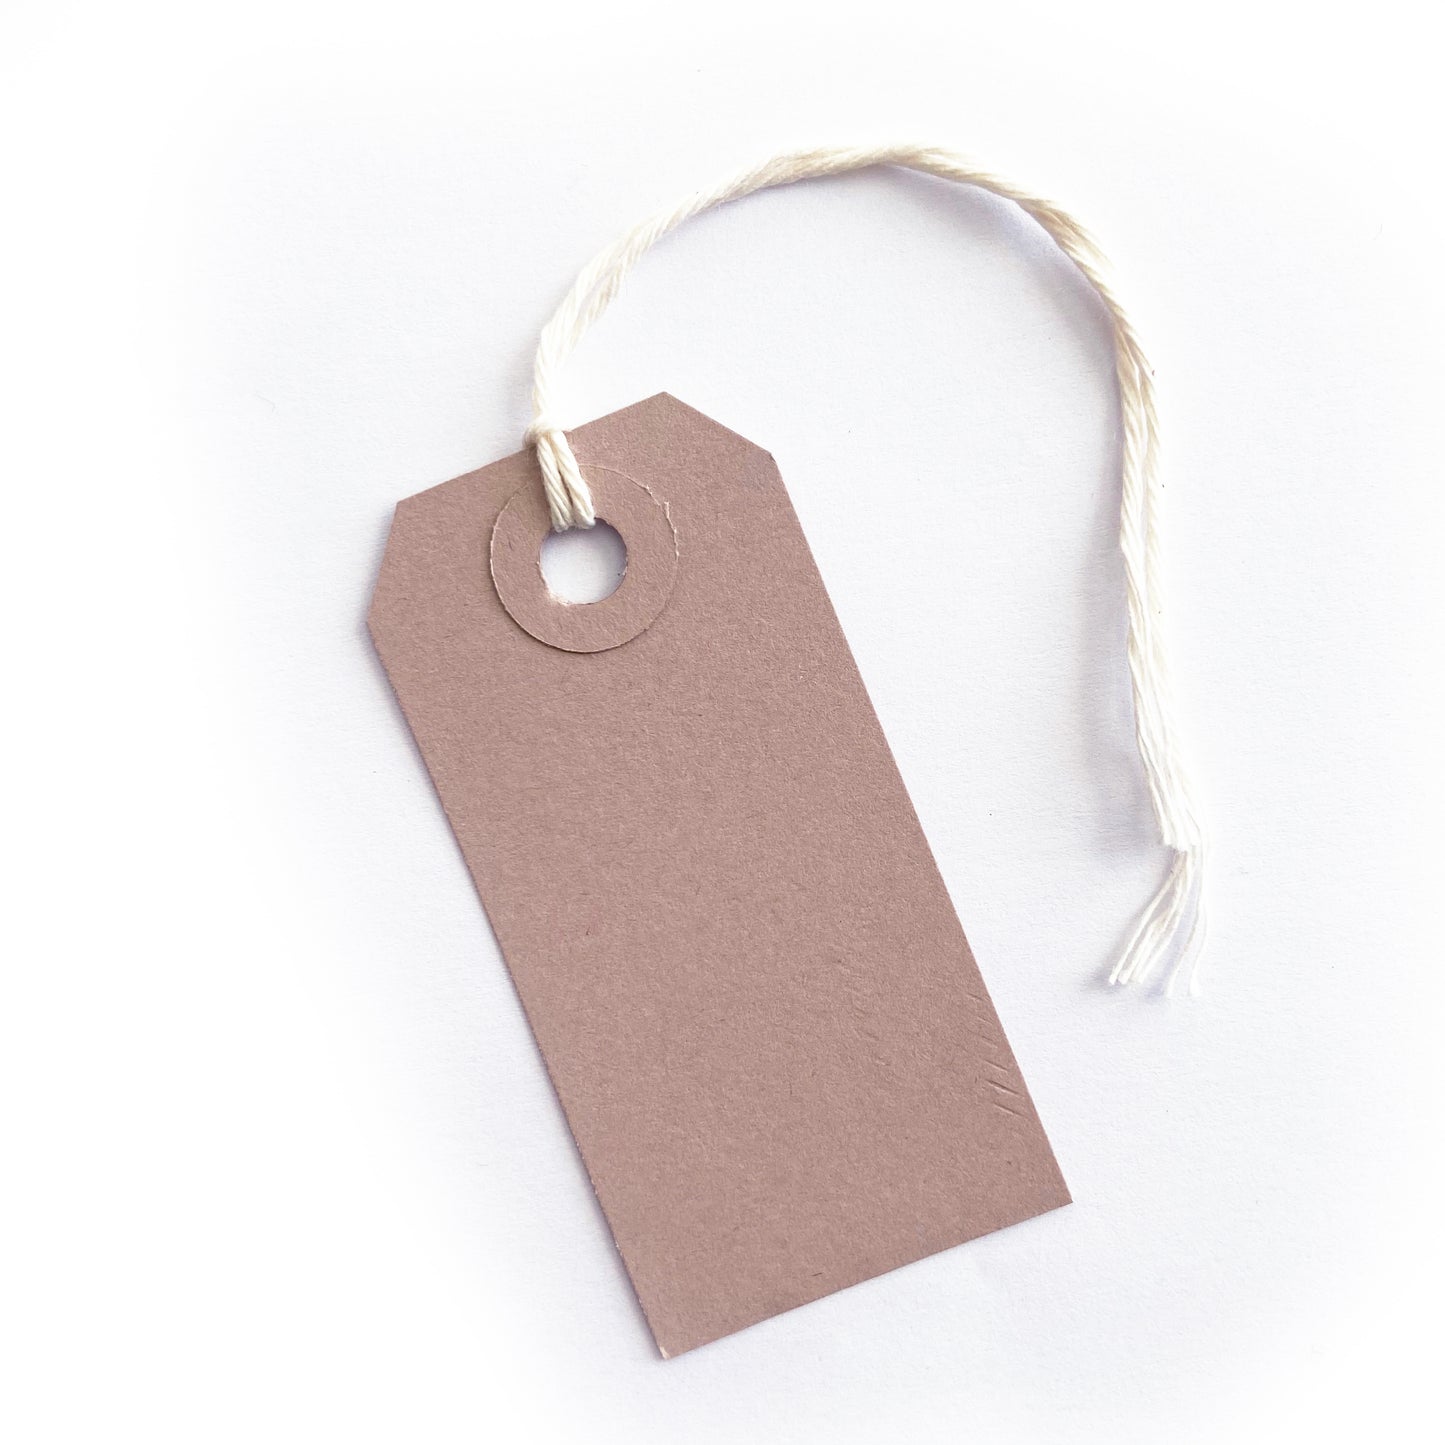 30 Vintage-Inspired Buff Card Luggage Tags 70mm x 35mm - SweetpeaStore